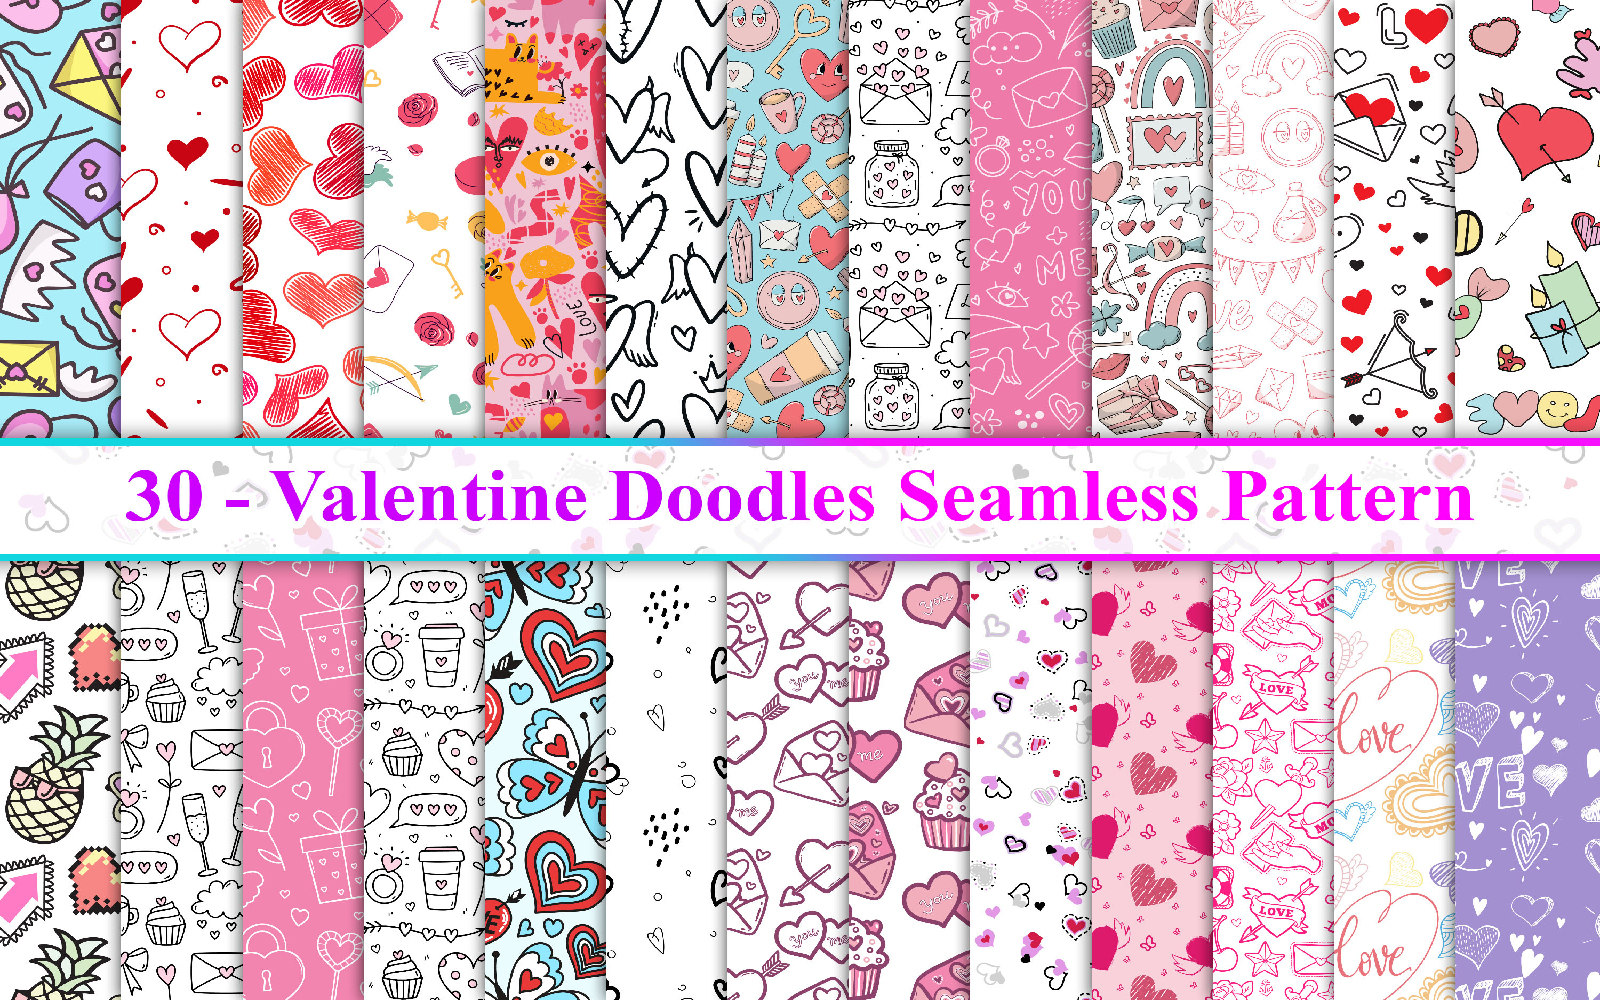 Valentines Day Doodles Seamless Pattern, Valentines Day Seamless Pattern, Doodles Seamless Pattern